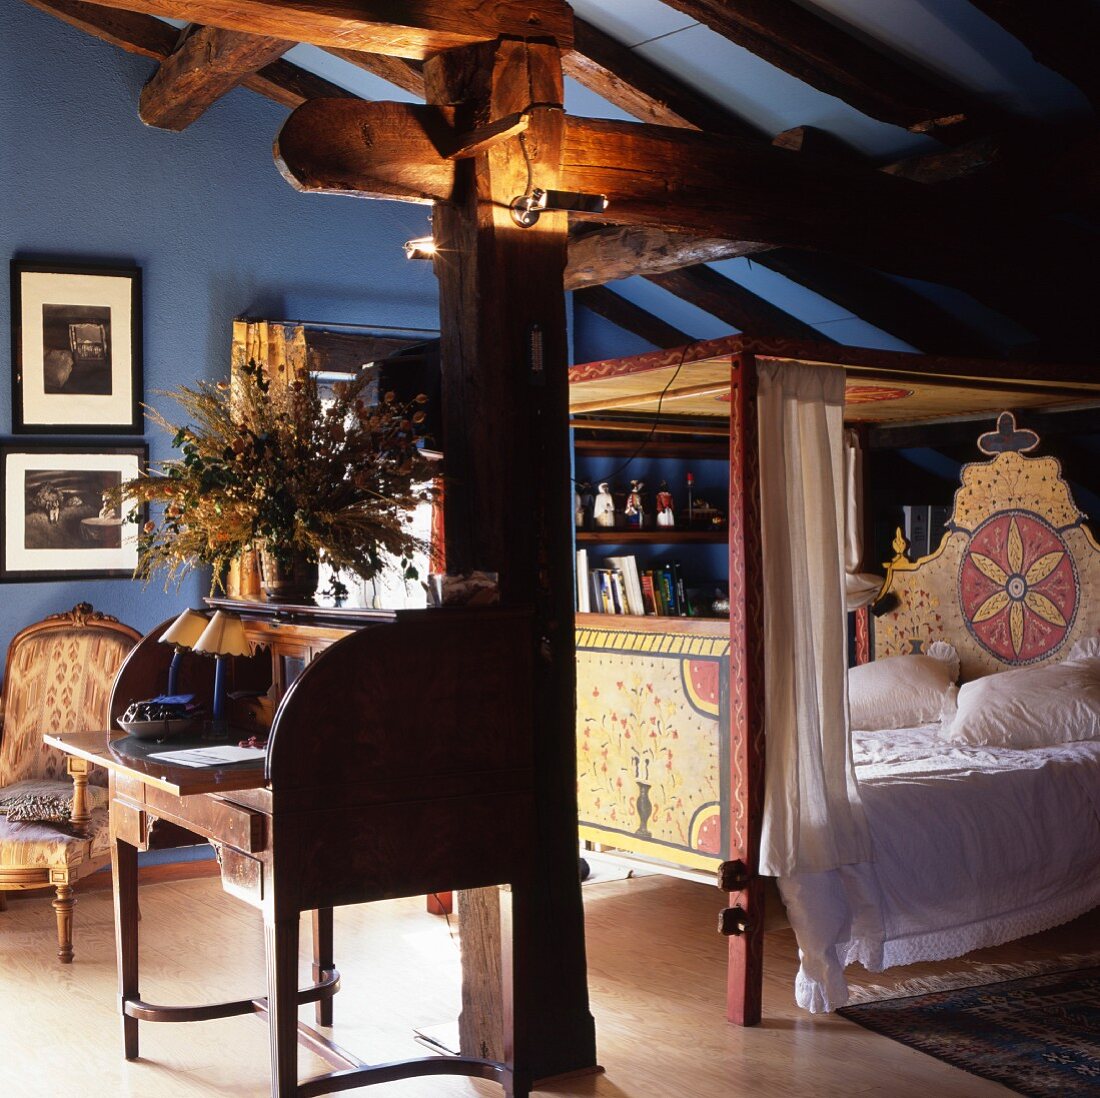 Attic room in shades of blue with painted four poster bed and open secretary